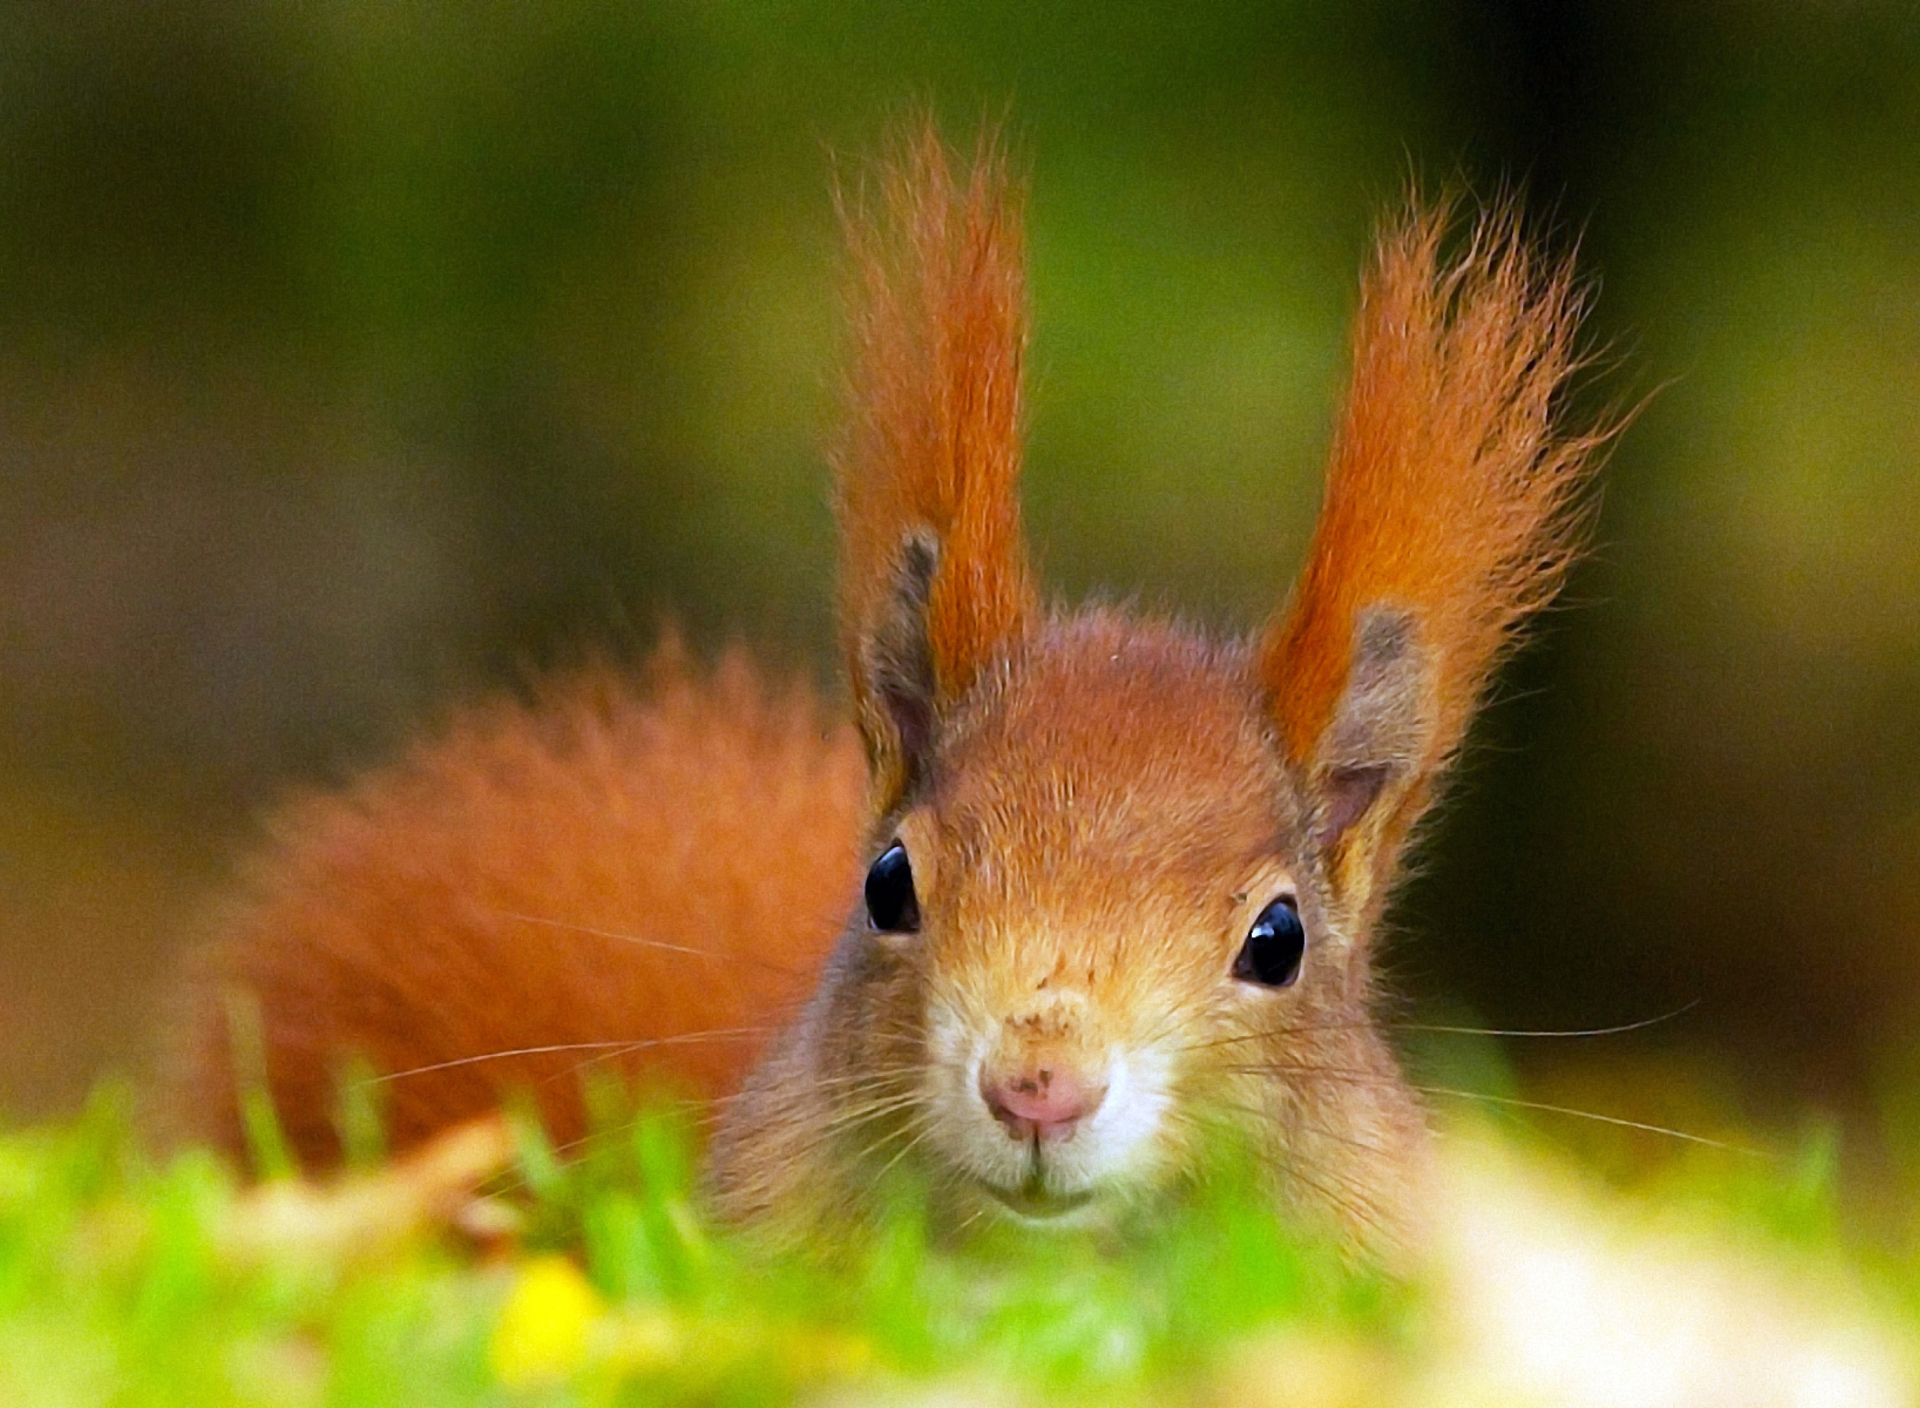 Funny Little Squirrel wallpaper 1920x1408